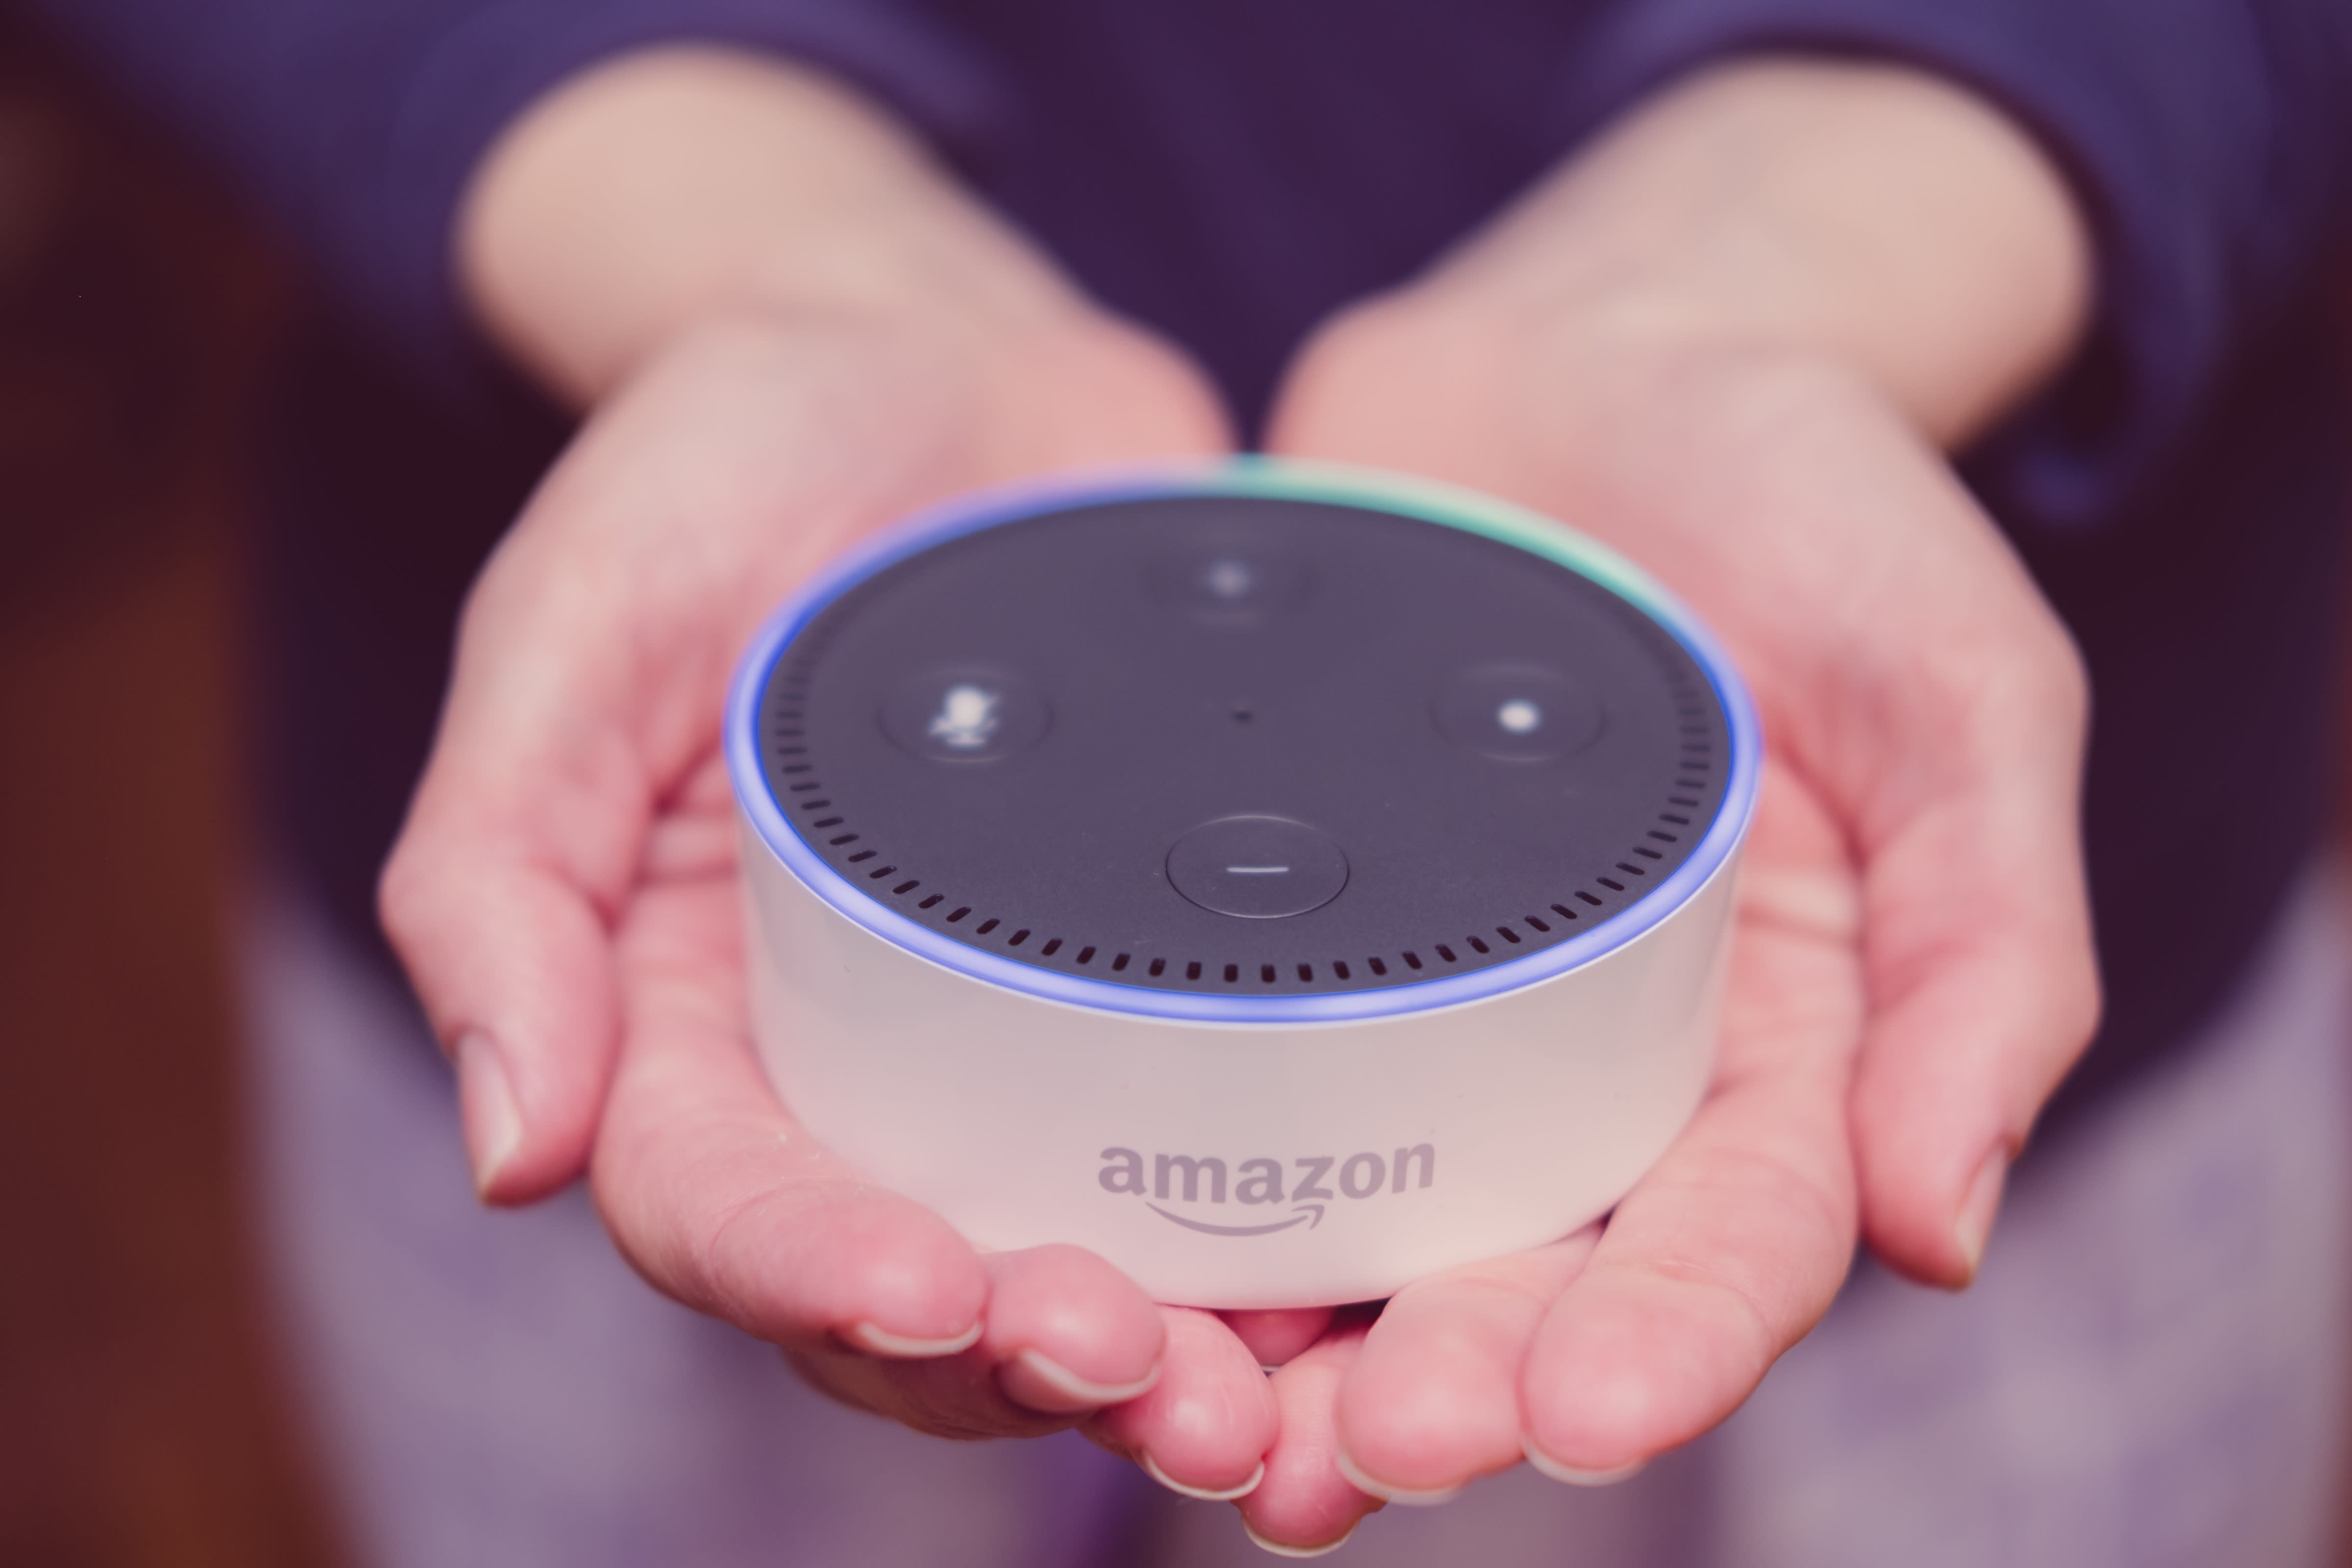 Amazon’s Alexa assistant told a child to do a potentially lethal challenge